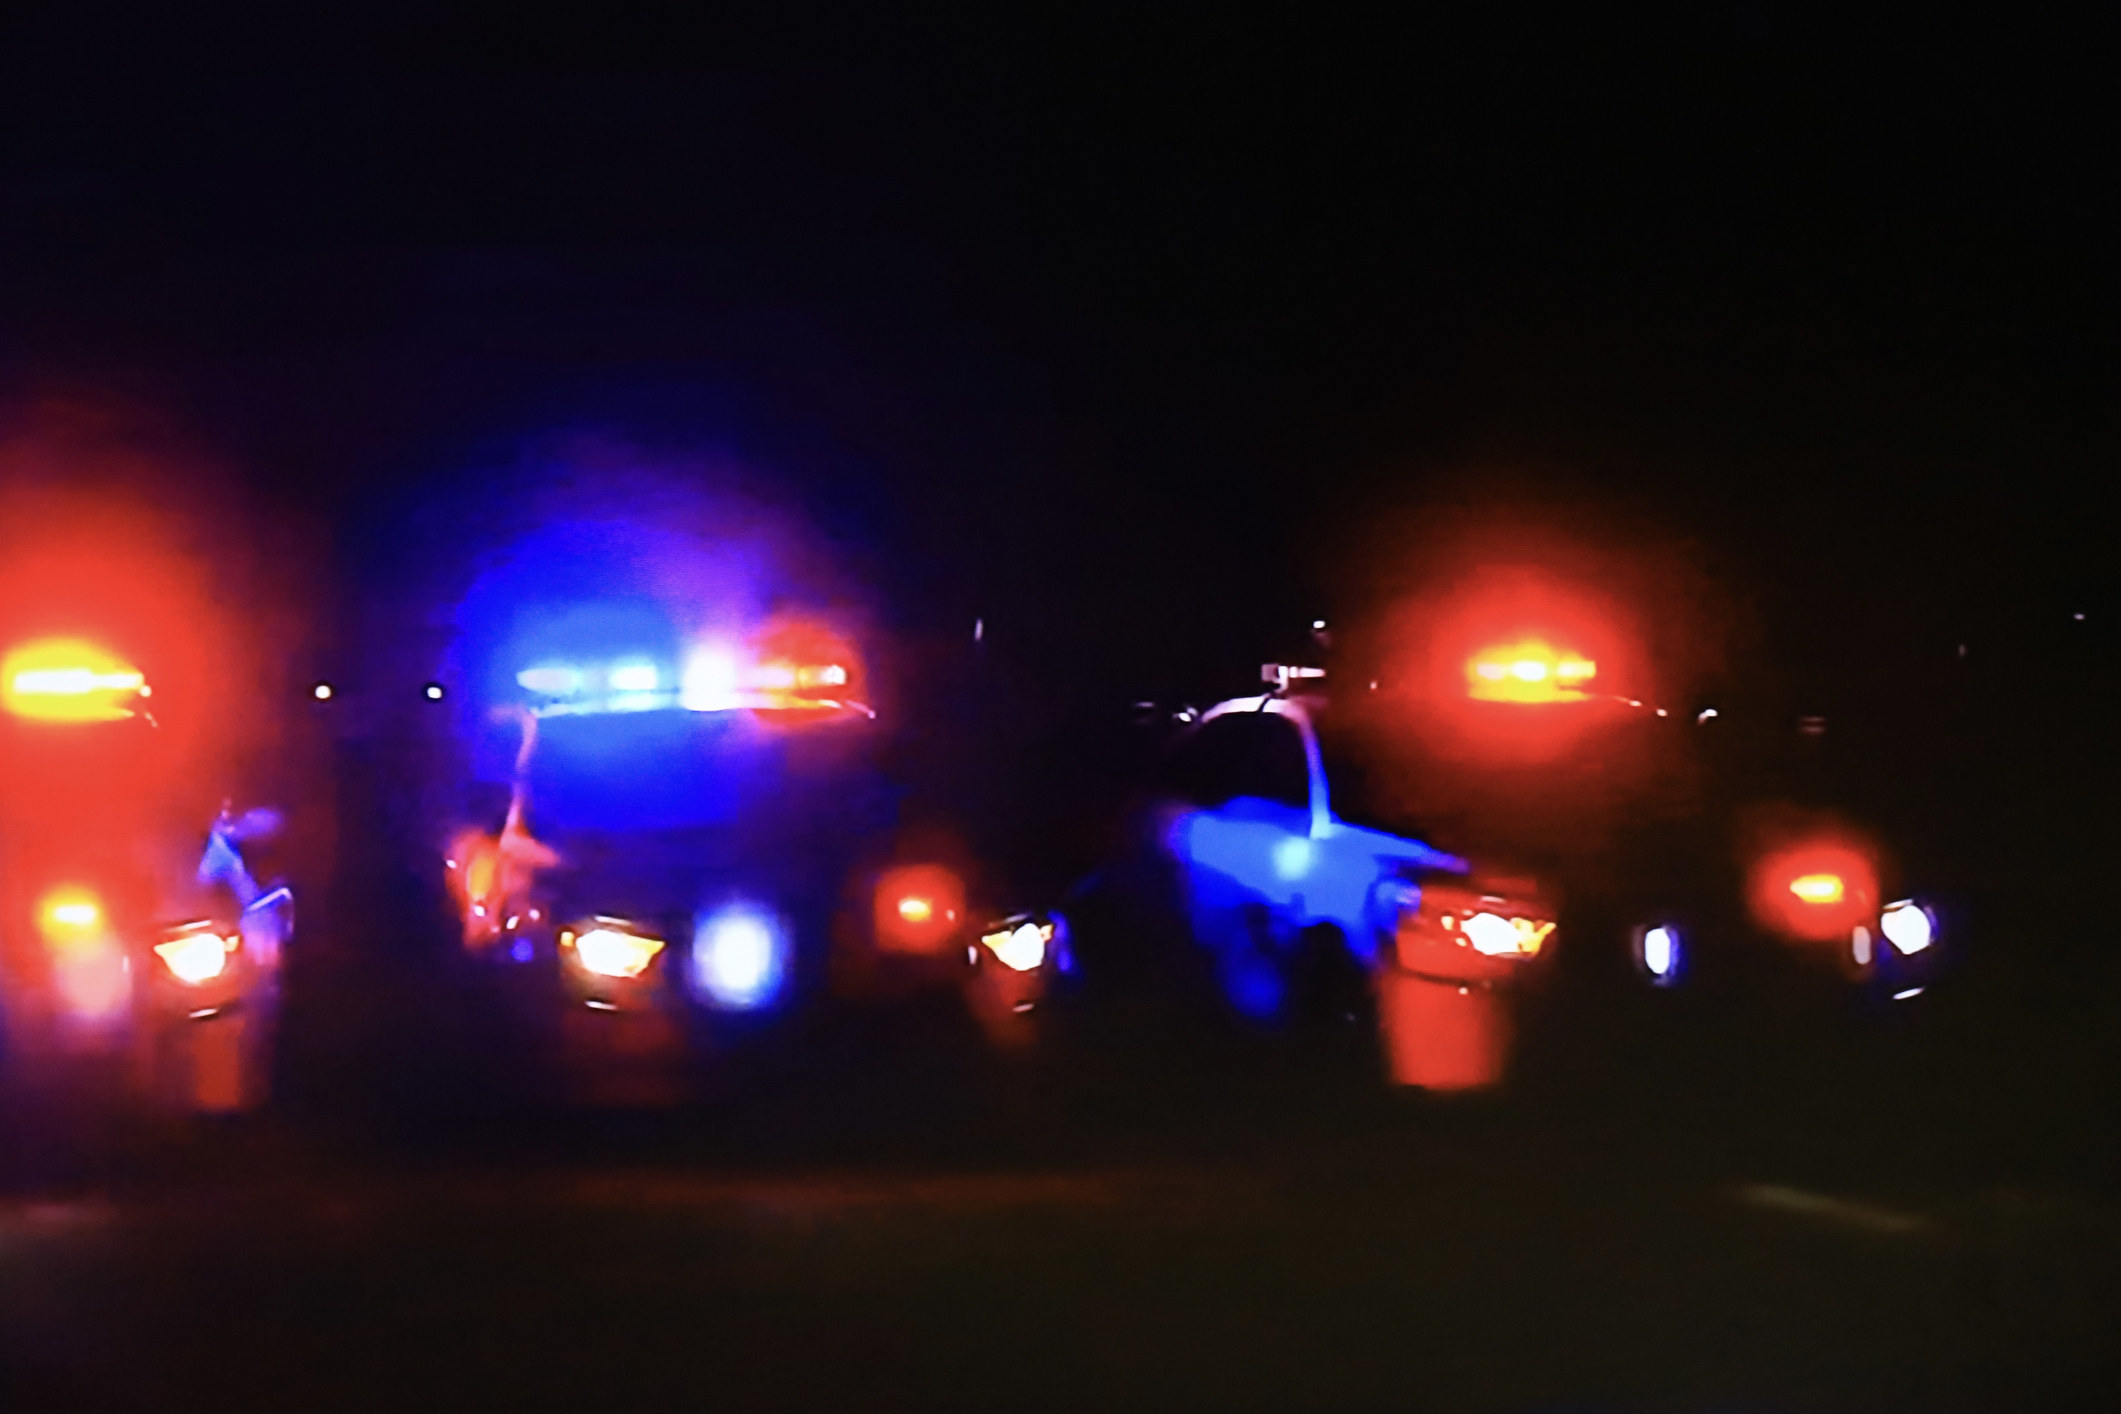 Police cars with flashing lights